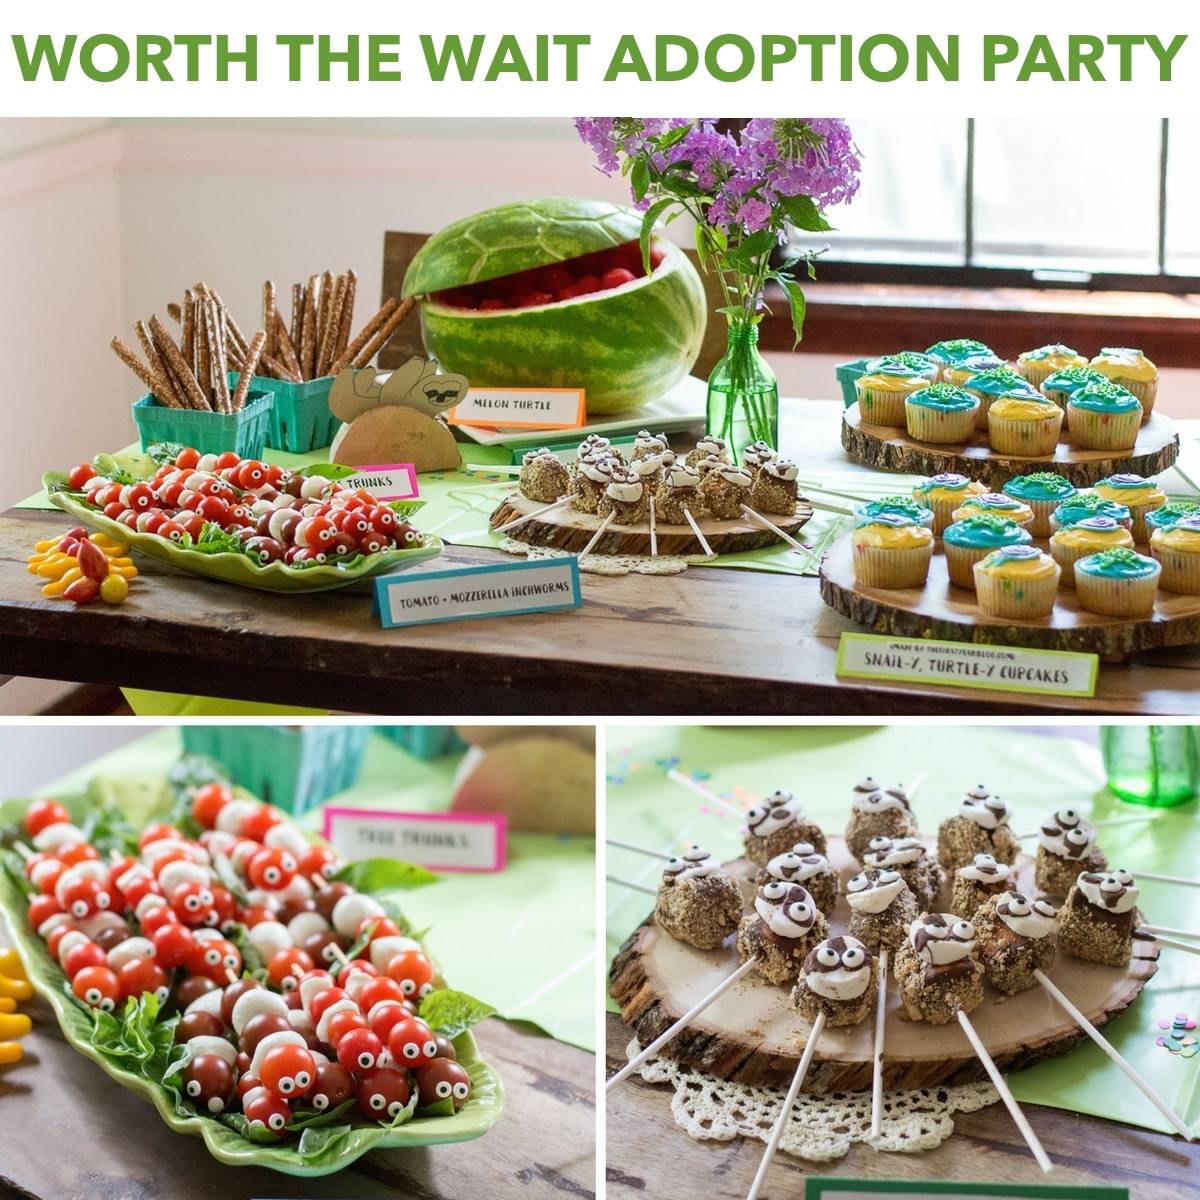 Worth the wait theme adoption party! Featuring slow animals - sloths, inchworms, turtles and snails! Tons of cute food ideas!